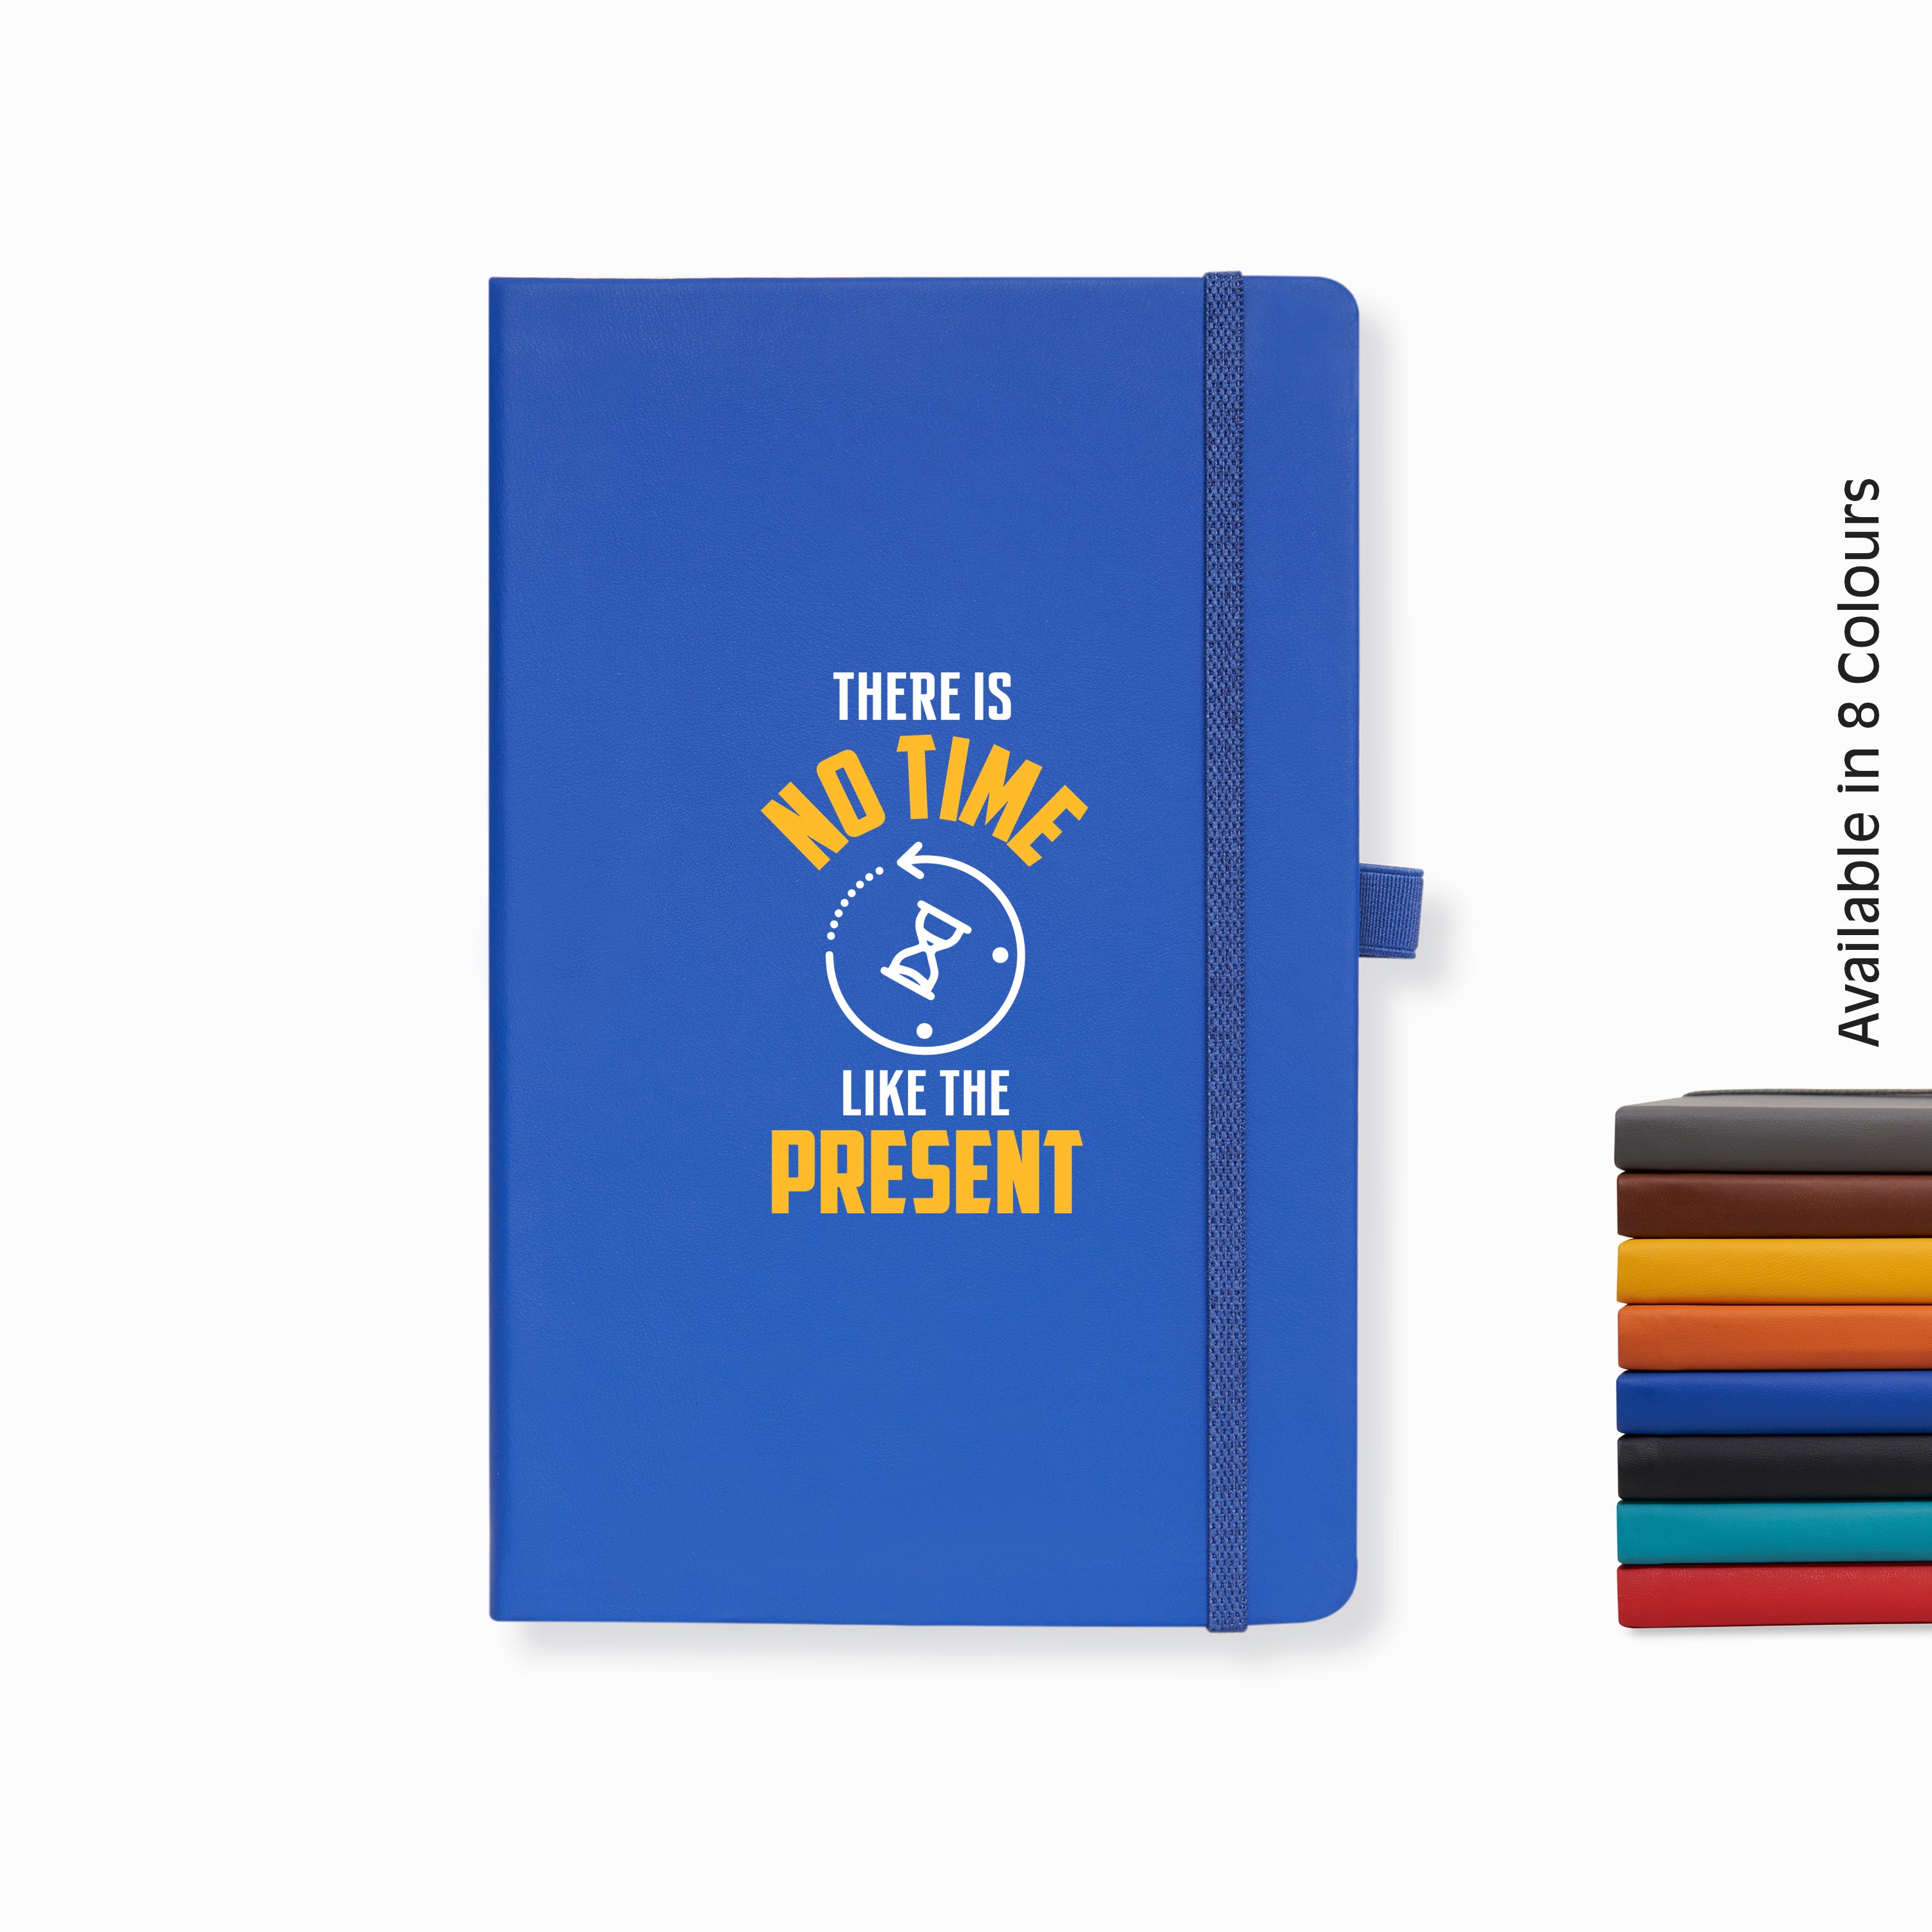 Doodle Pro Series Executive A5 PU Leather Hardbound Ruled Bright Blue Notebook with Pen Loop [There Is No Time]